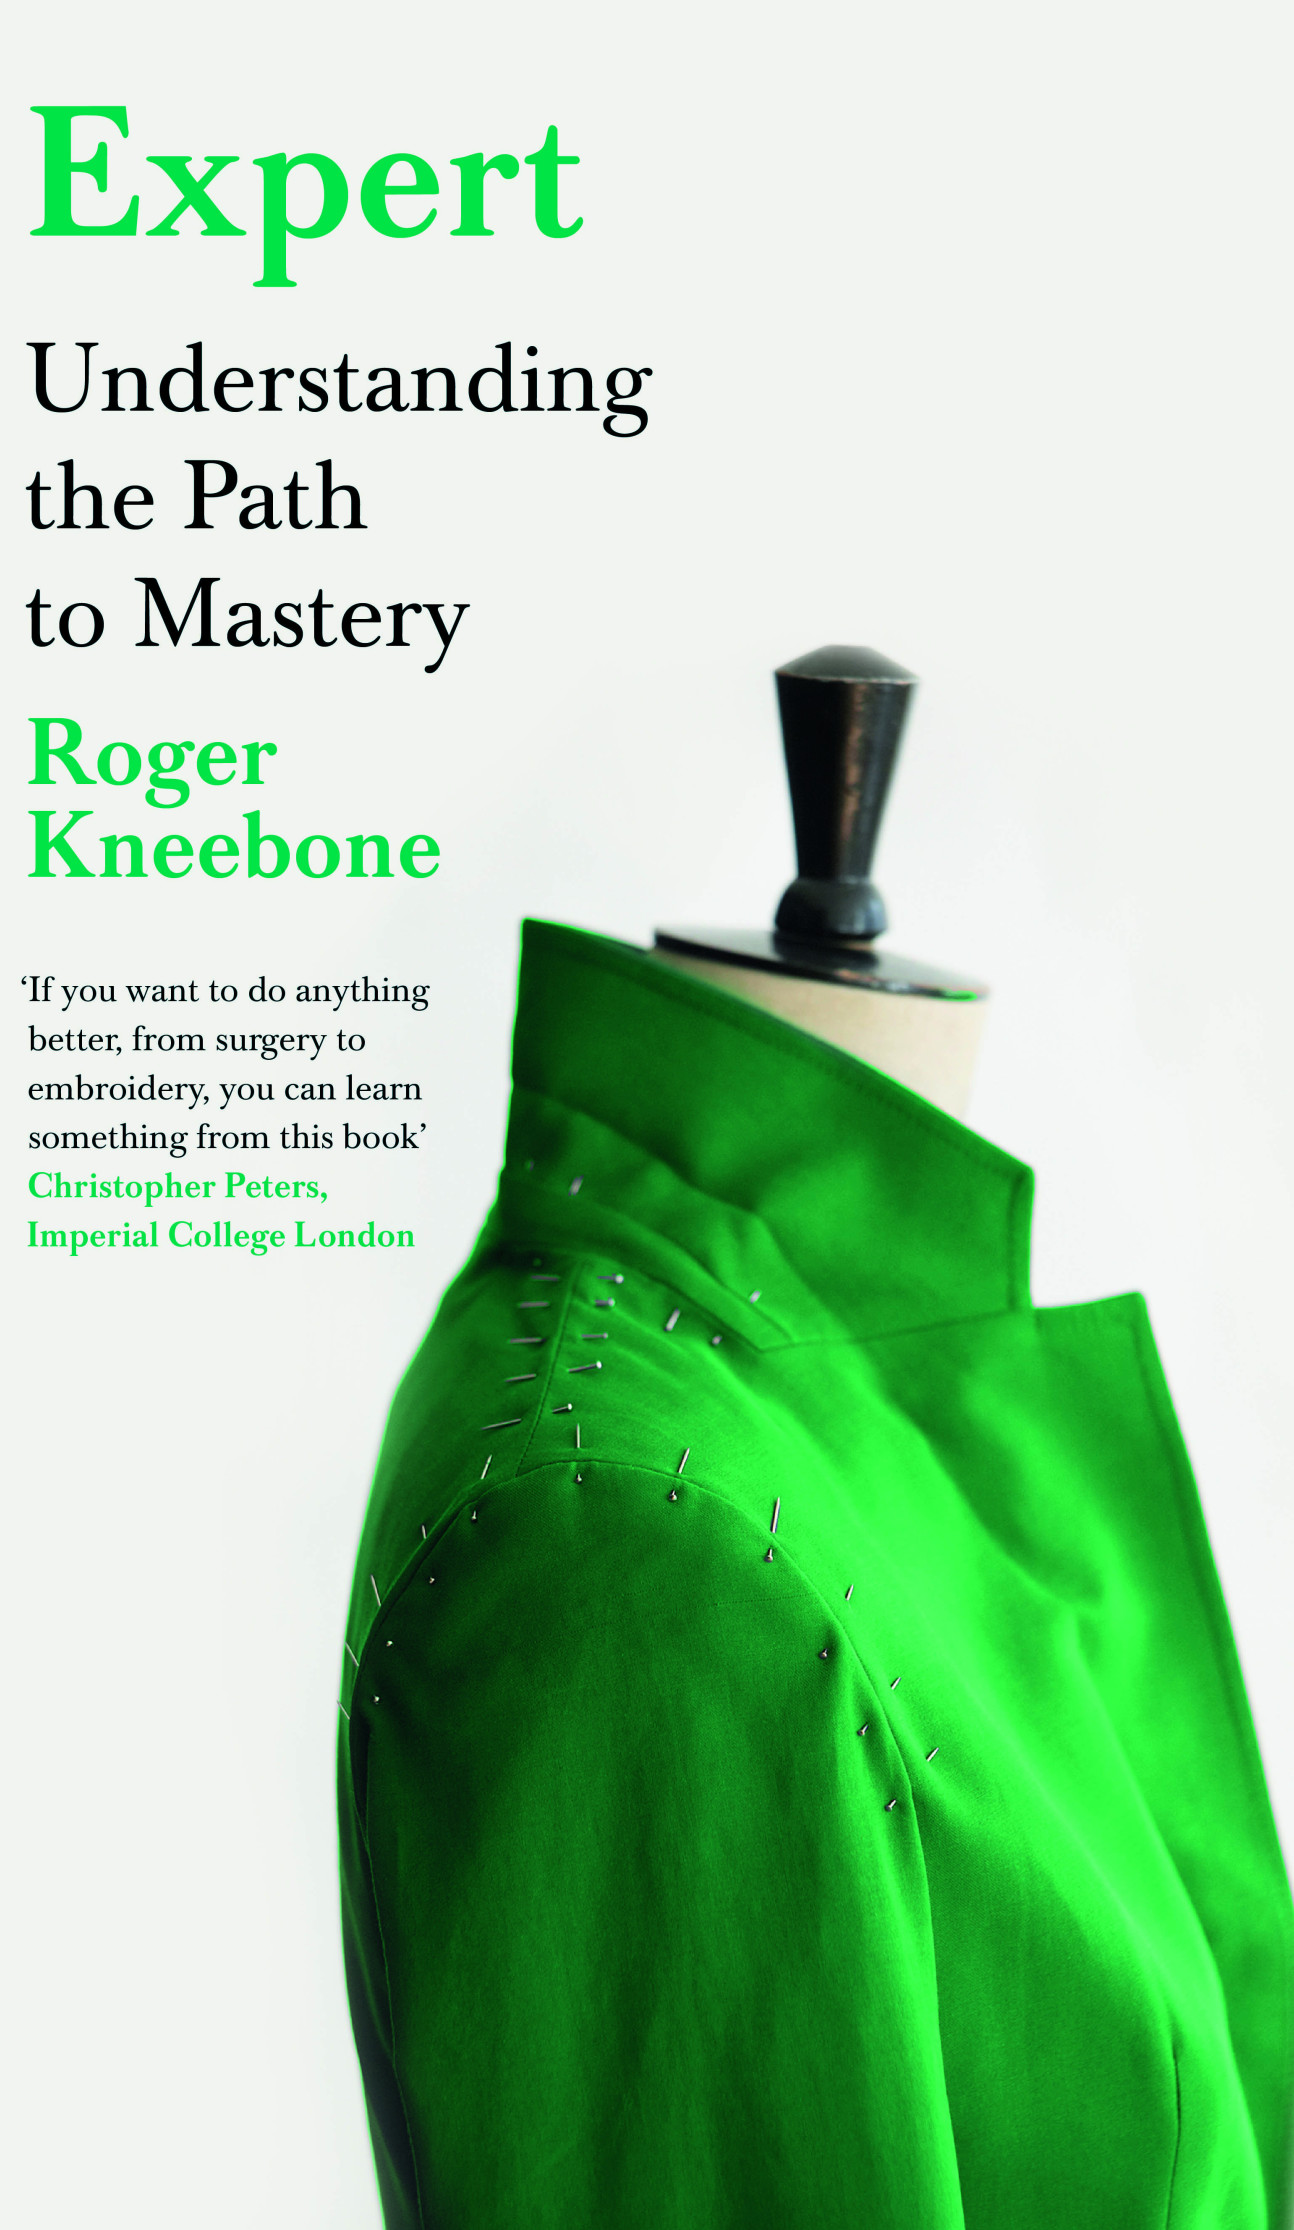 The front cover of Expert by Roger Kneebone